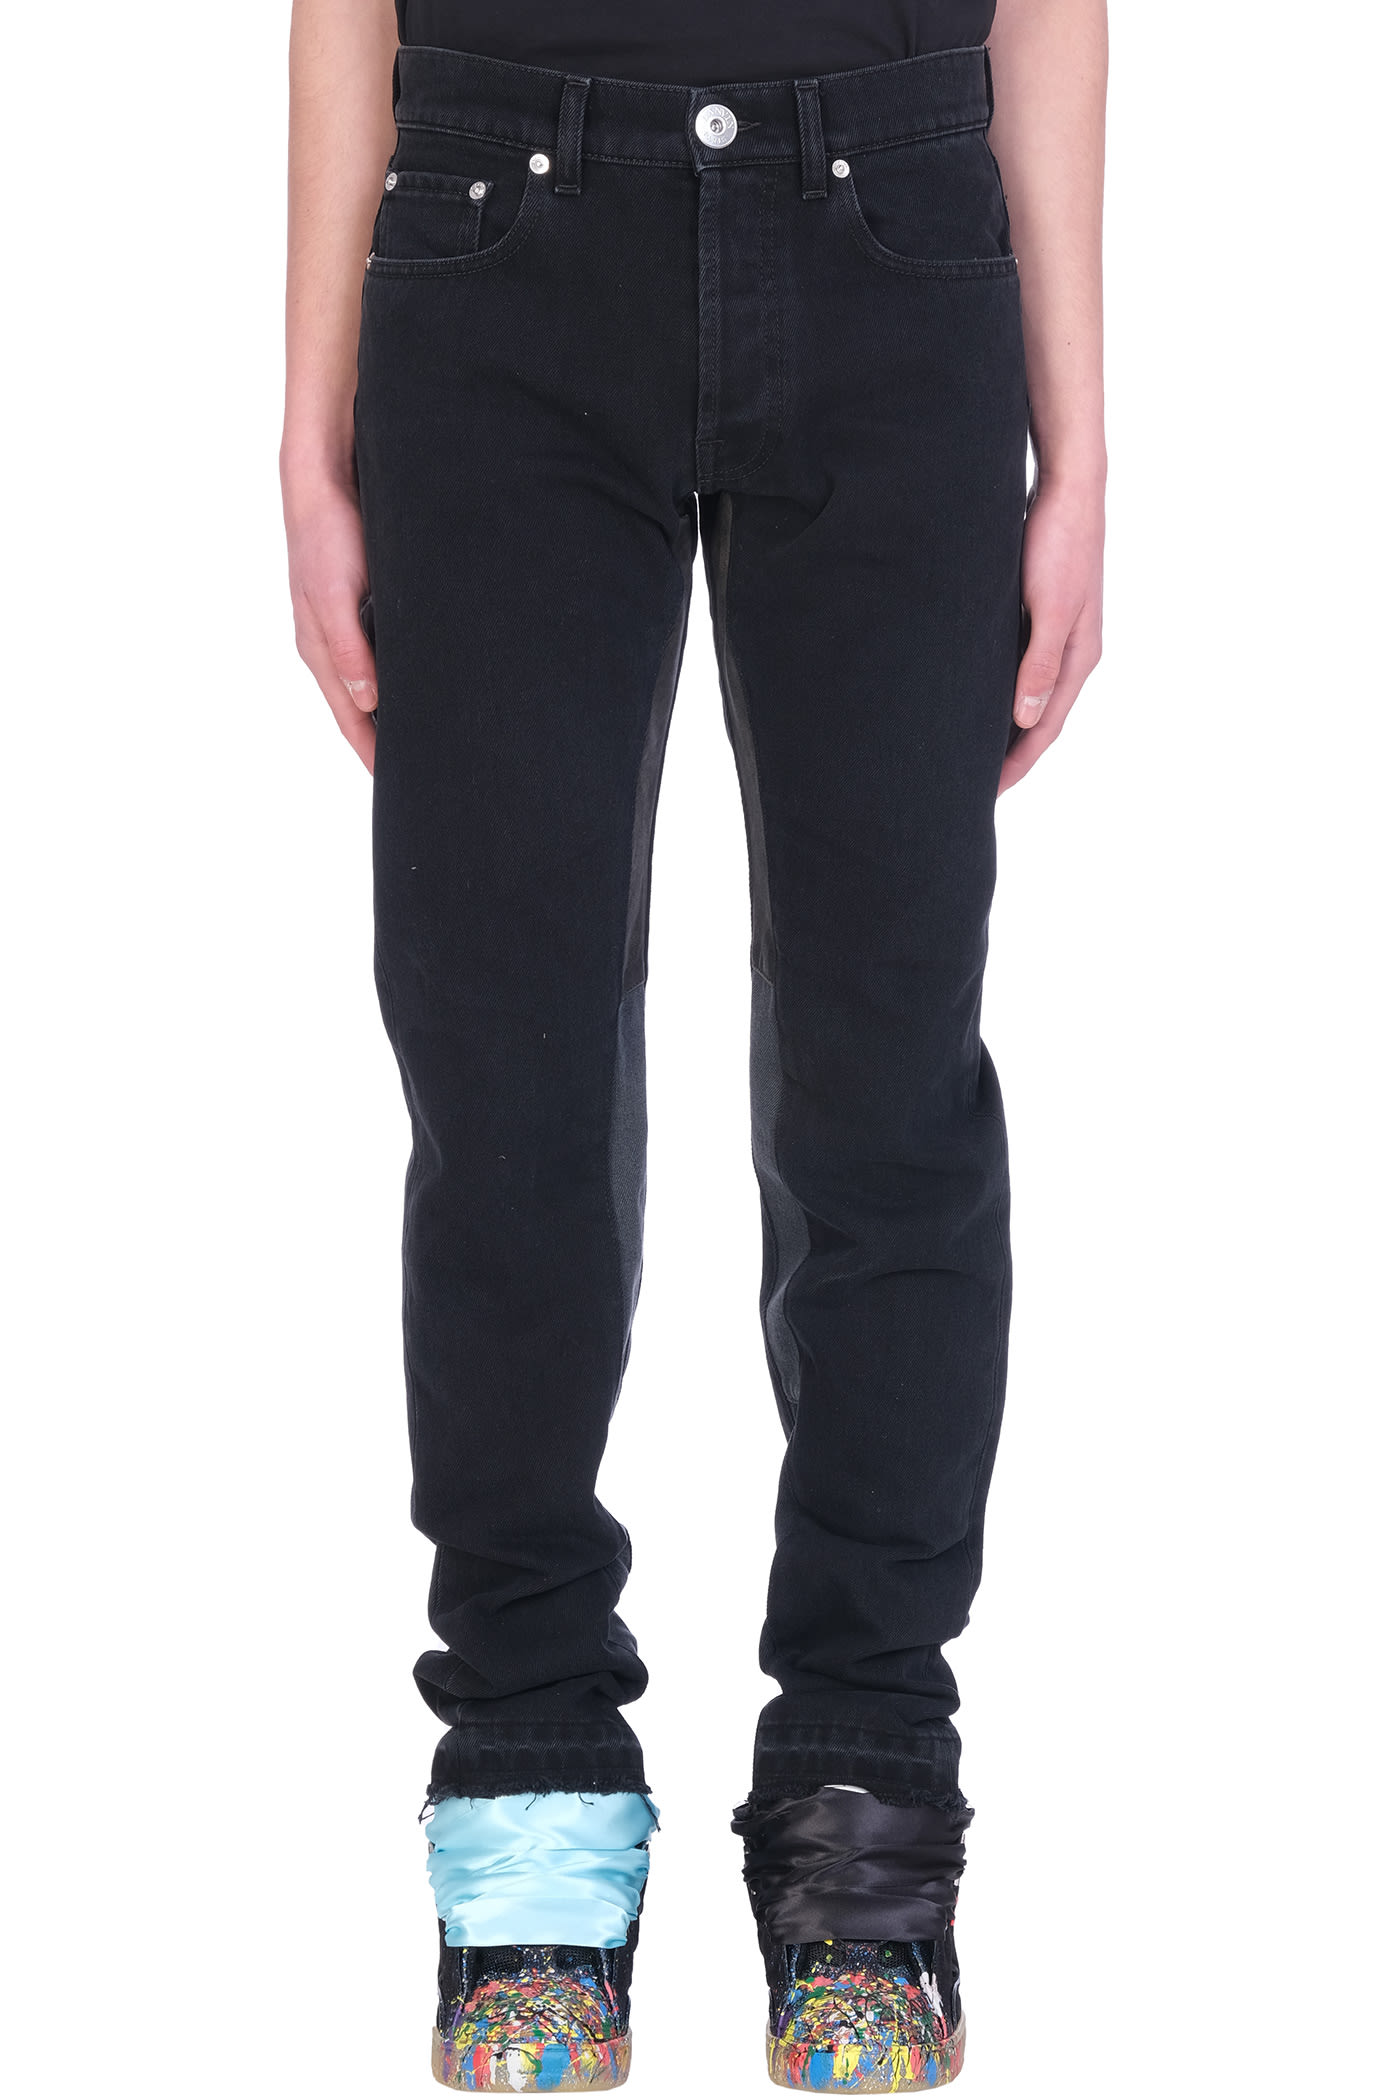 Gallery Dept. Jeans In Black Cotton